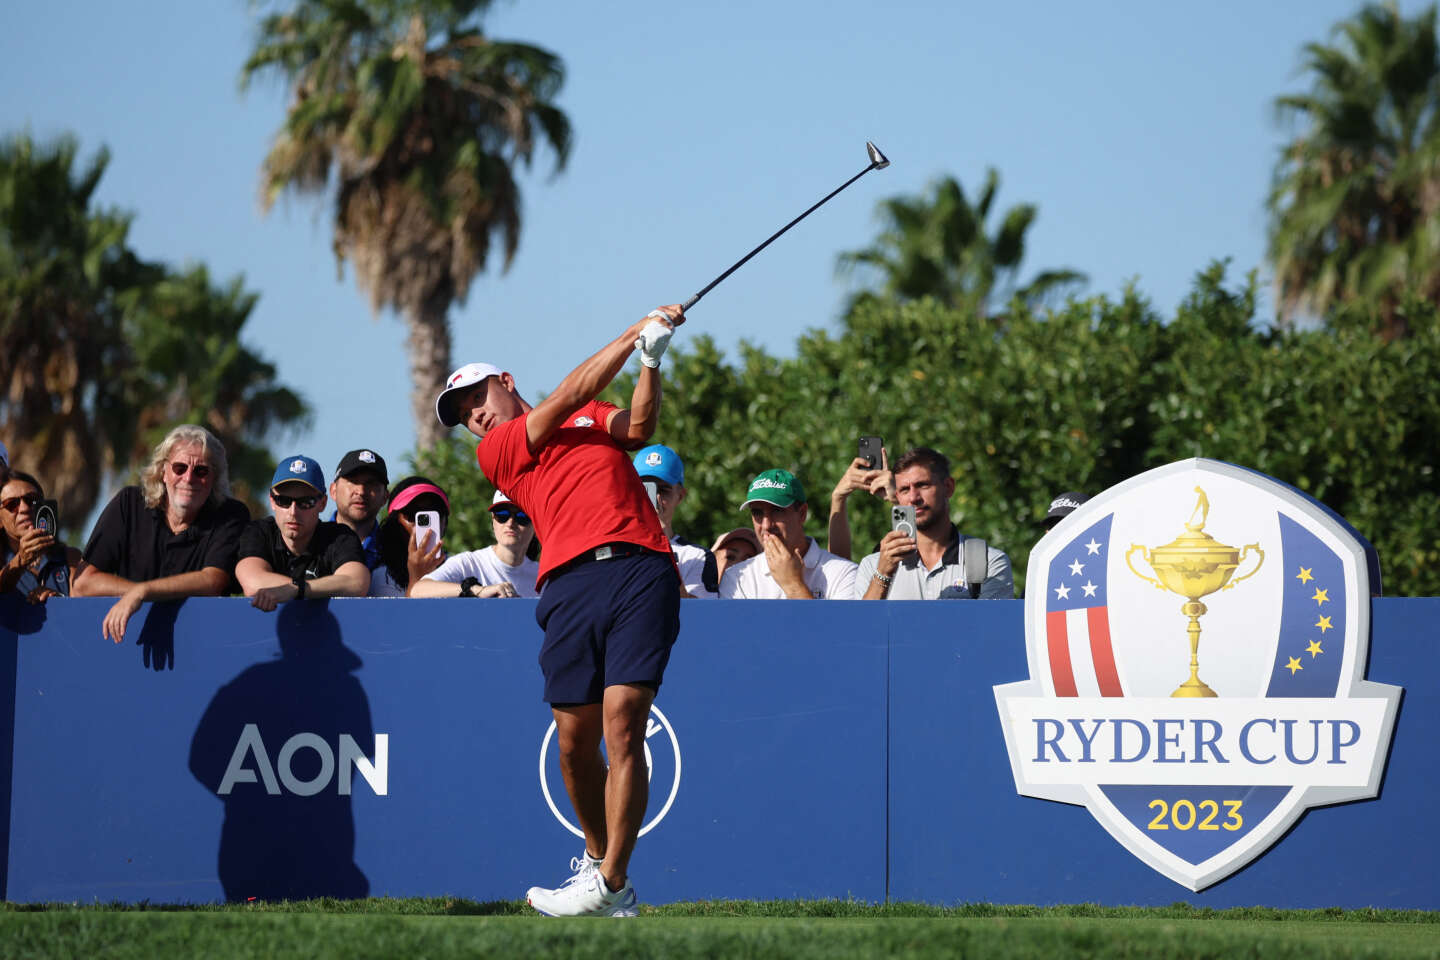 the Ryder Cup, a historic competition unlike any other